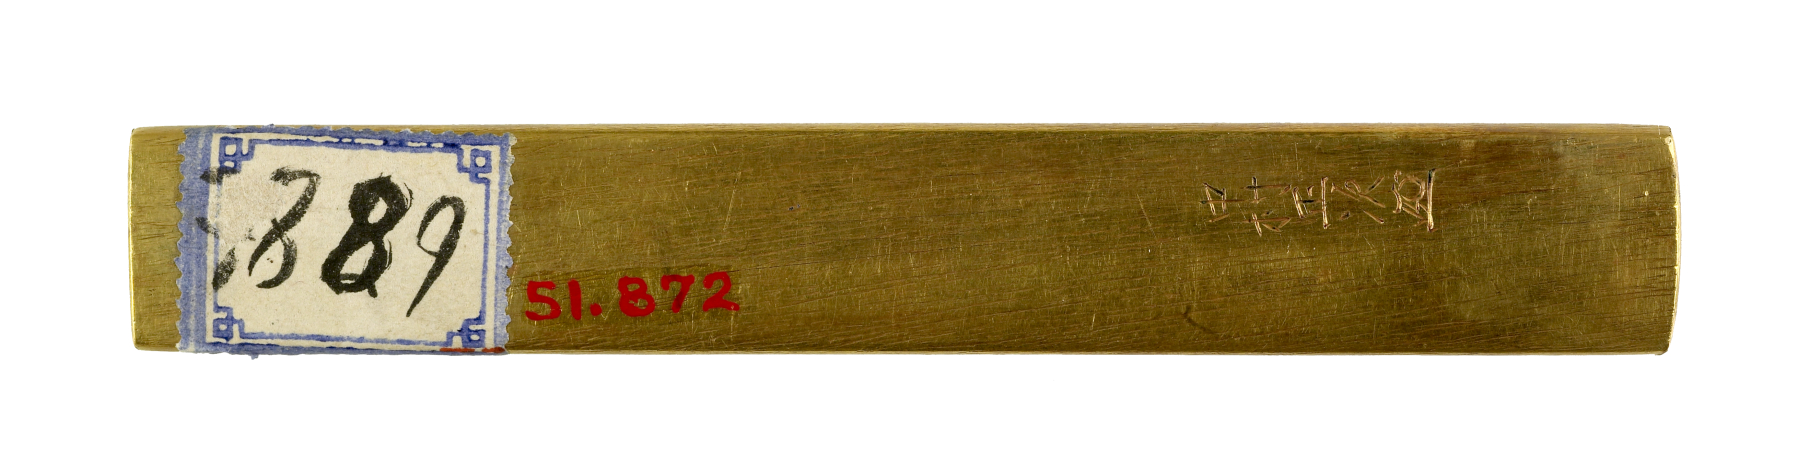 Image for Kozuka with a Spiny Lobster